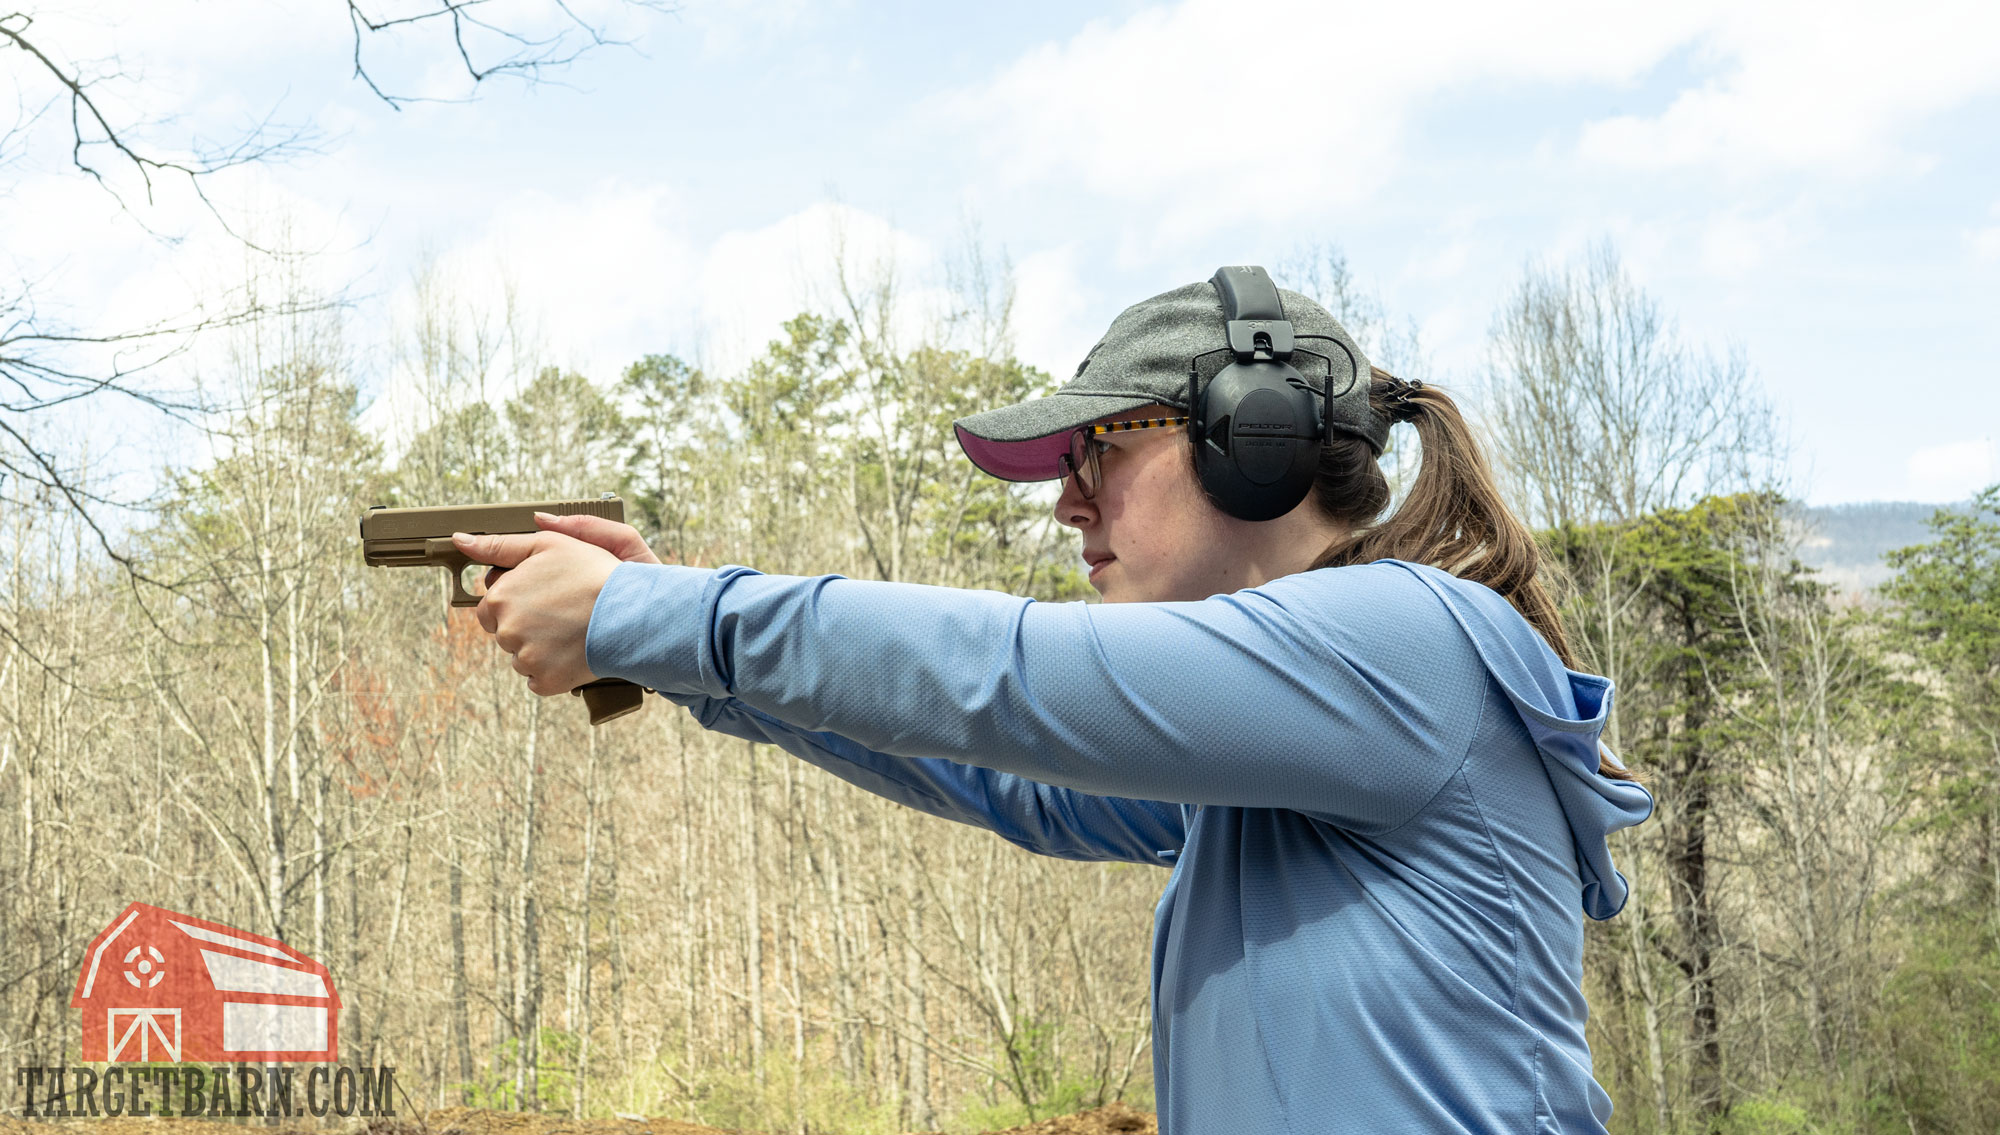 the author shooting blazer brass out of a glock pistol